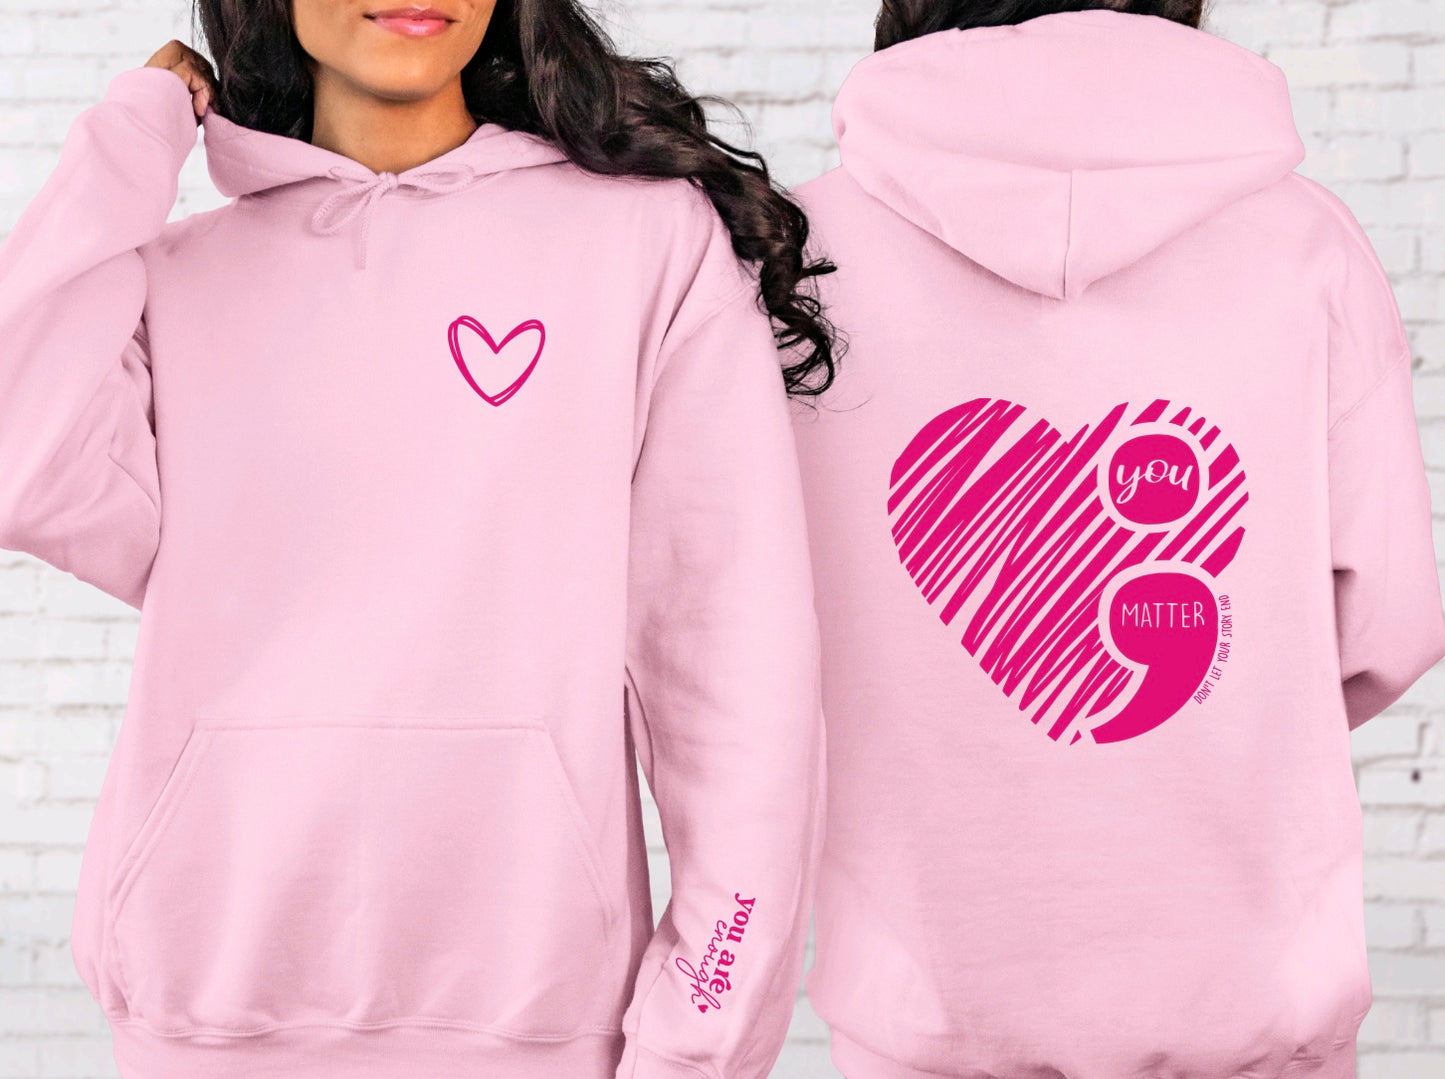 You matter- semi colon suicide prevention unisex hoodie in pink with sleeve graphic 